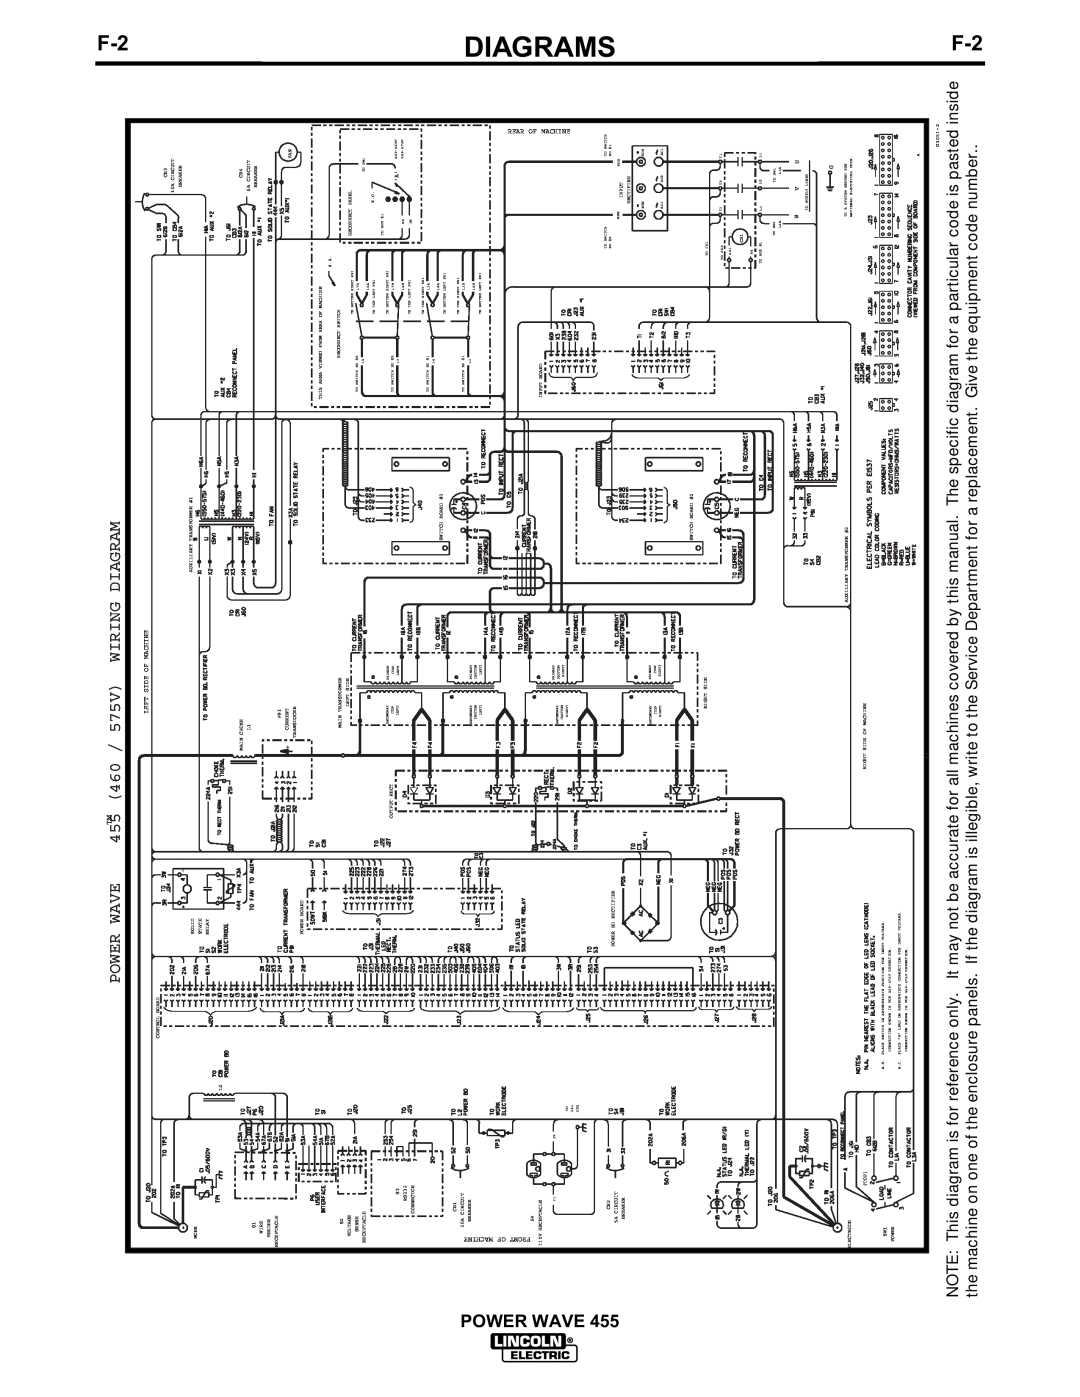 Lincoln Electric IM583-A manual Diagrams, Power Wave, Wiring Diagram, 455 